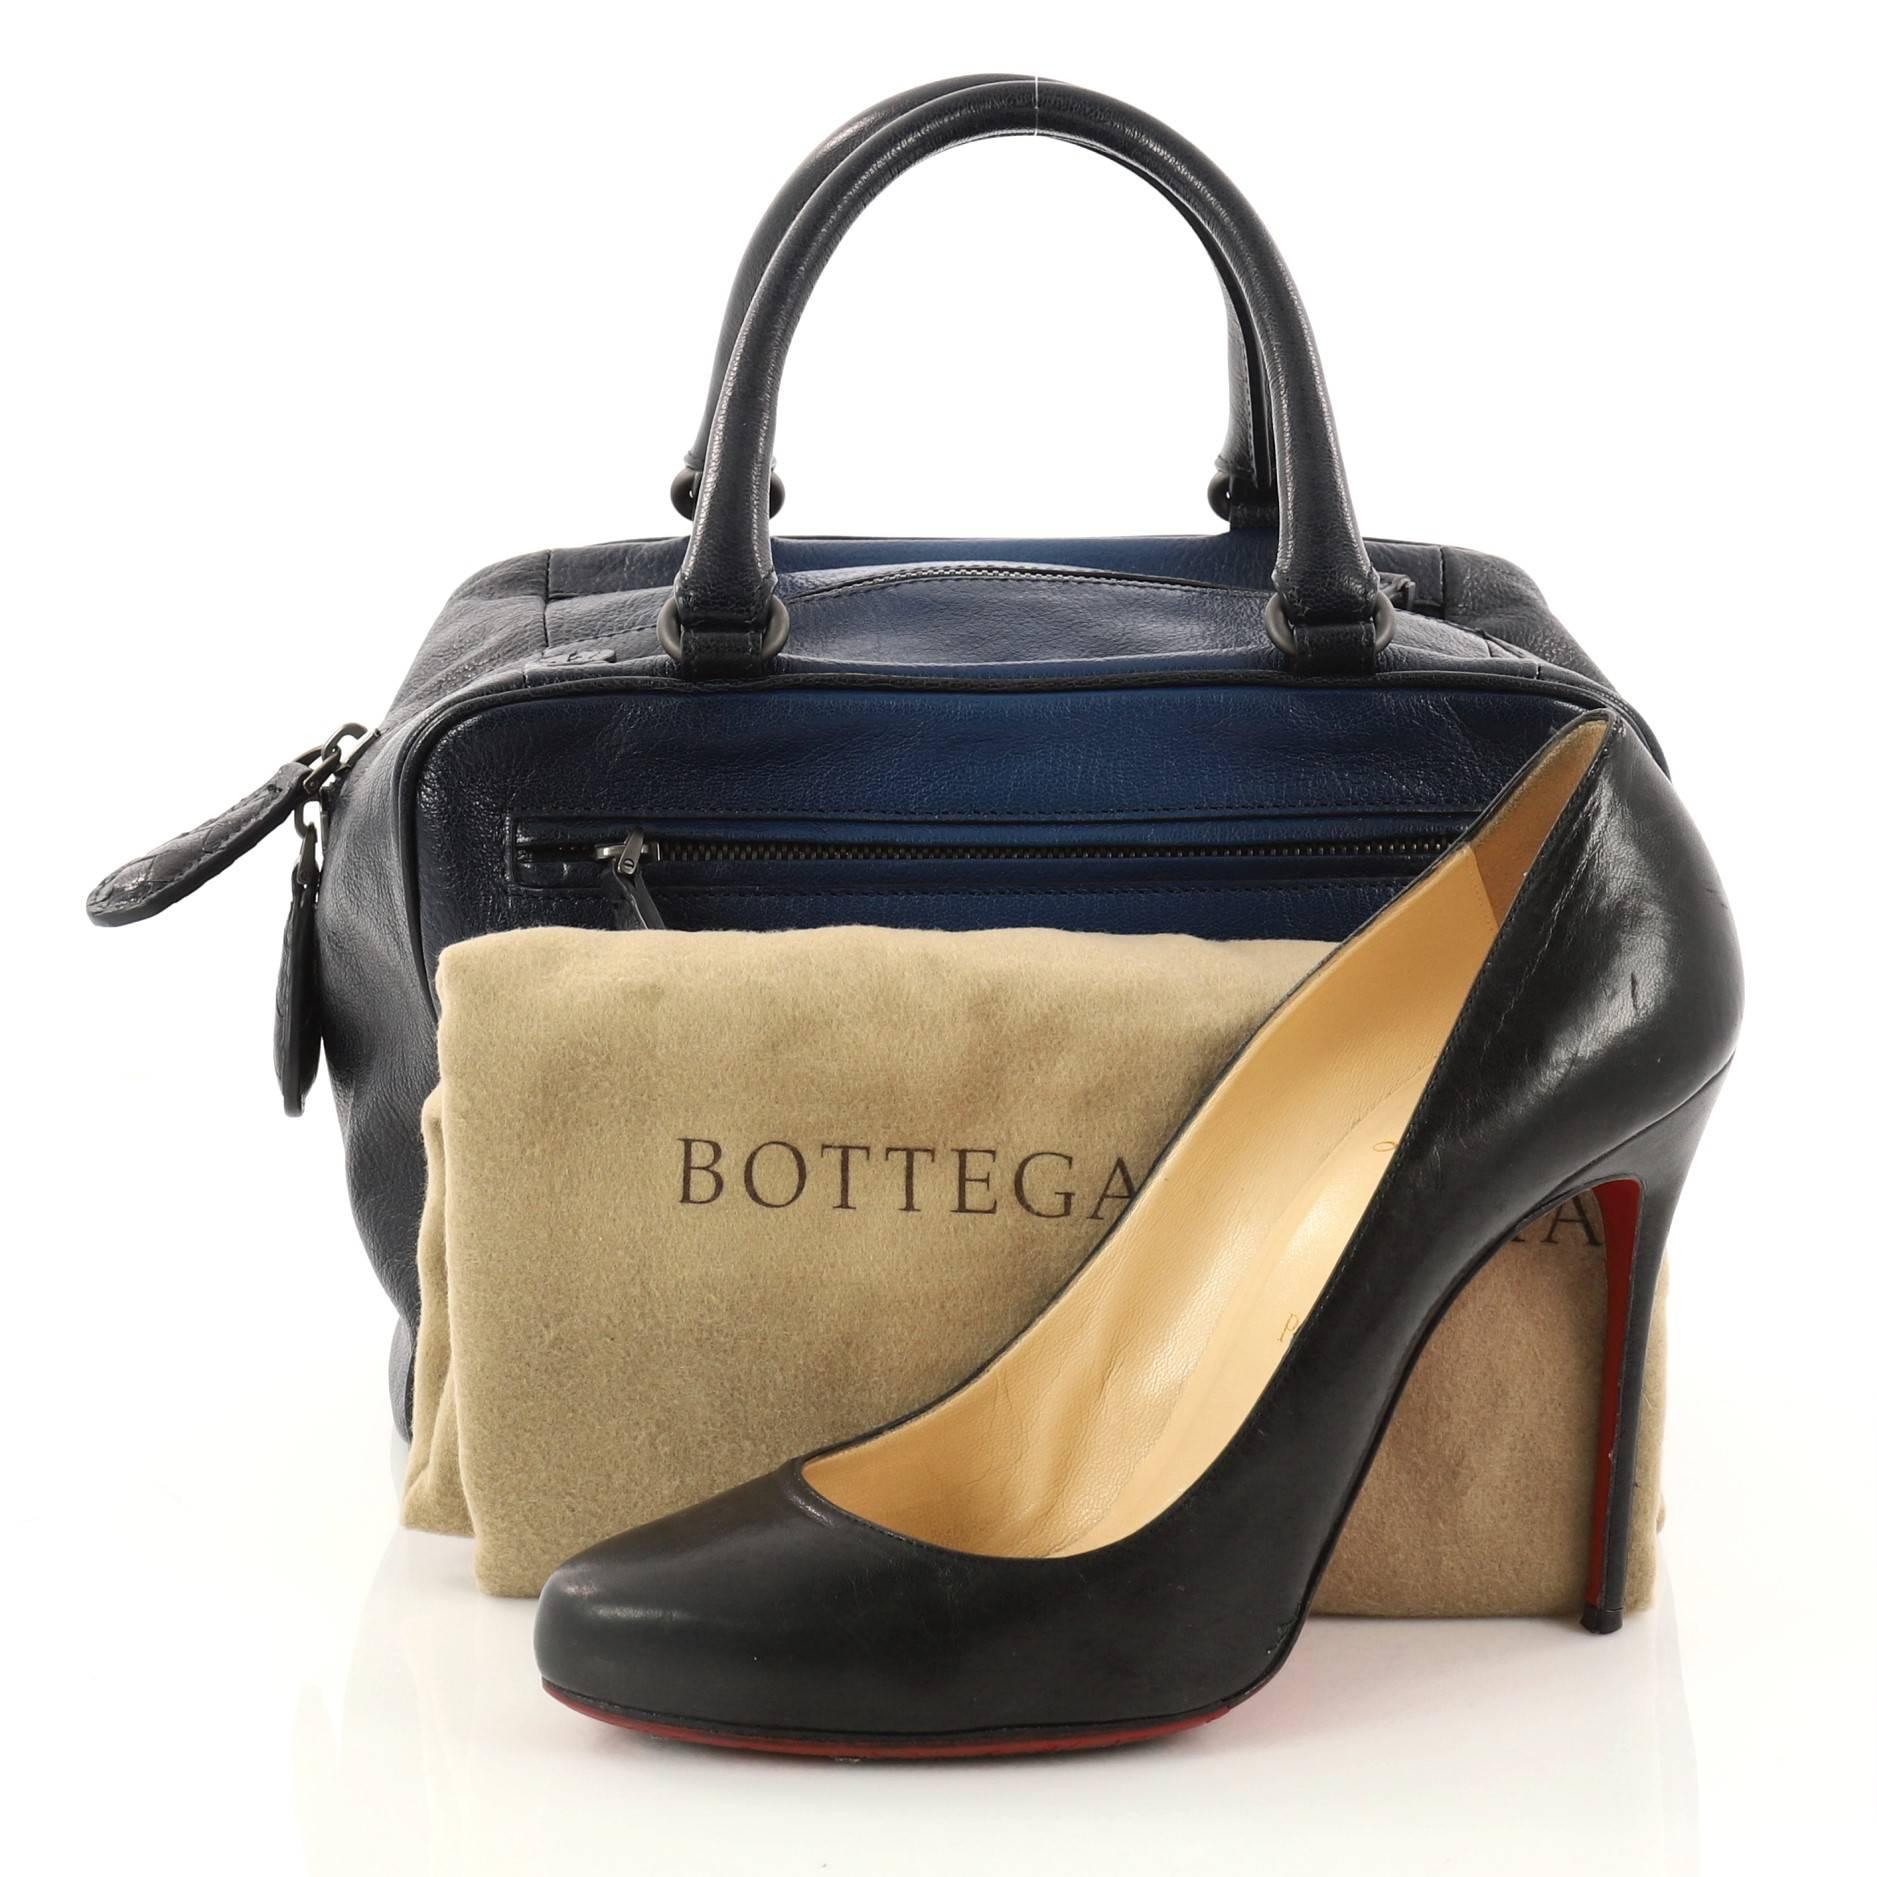 This authentic Bottega Veneta Brera Handbag Ombre Leather Small is sophisticated and classic in design perfect for everyday use. Crafted in blue ombre leather, this bag features dual-woven handles, four exterior zip pockets and gunmetal-tone